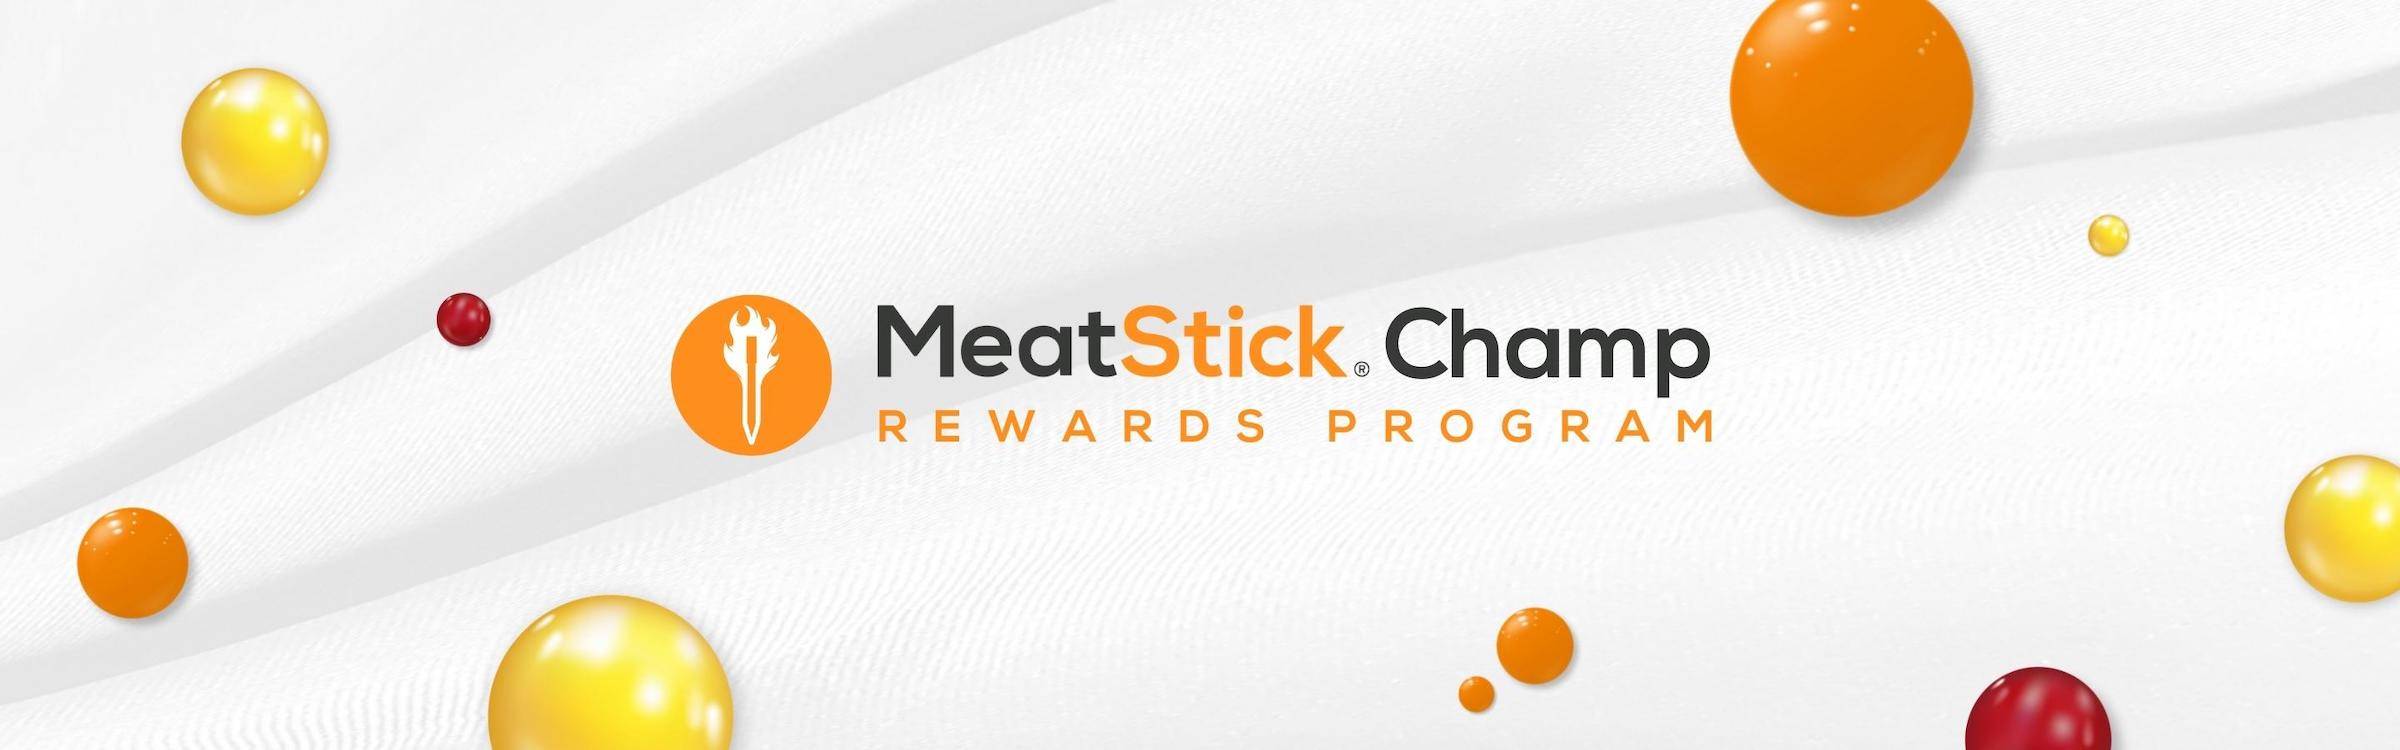 The MeatStick Champ Rewards Program designed for you to redeem gifts by earning mission points